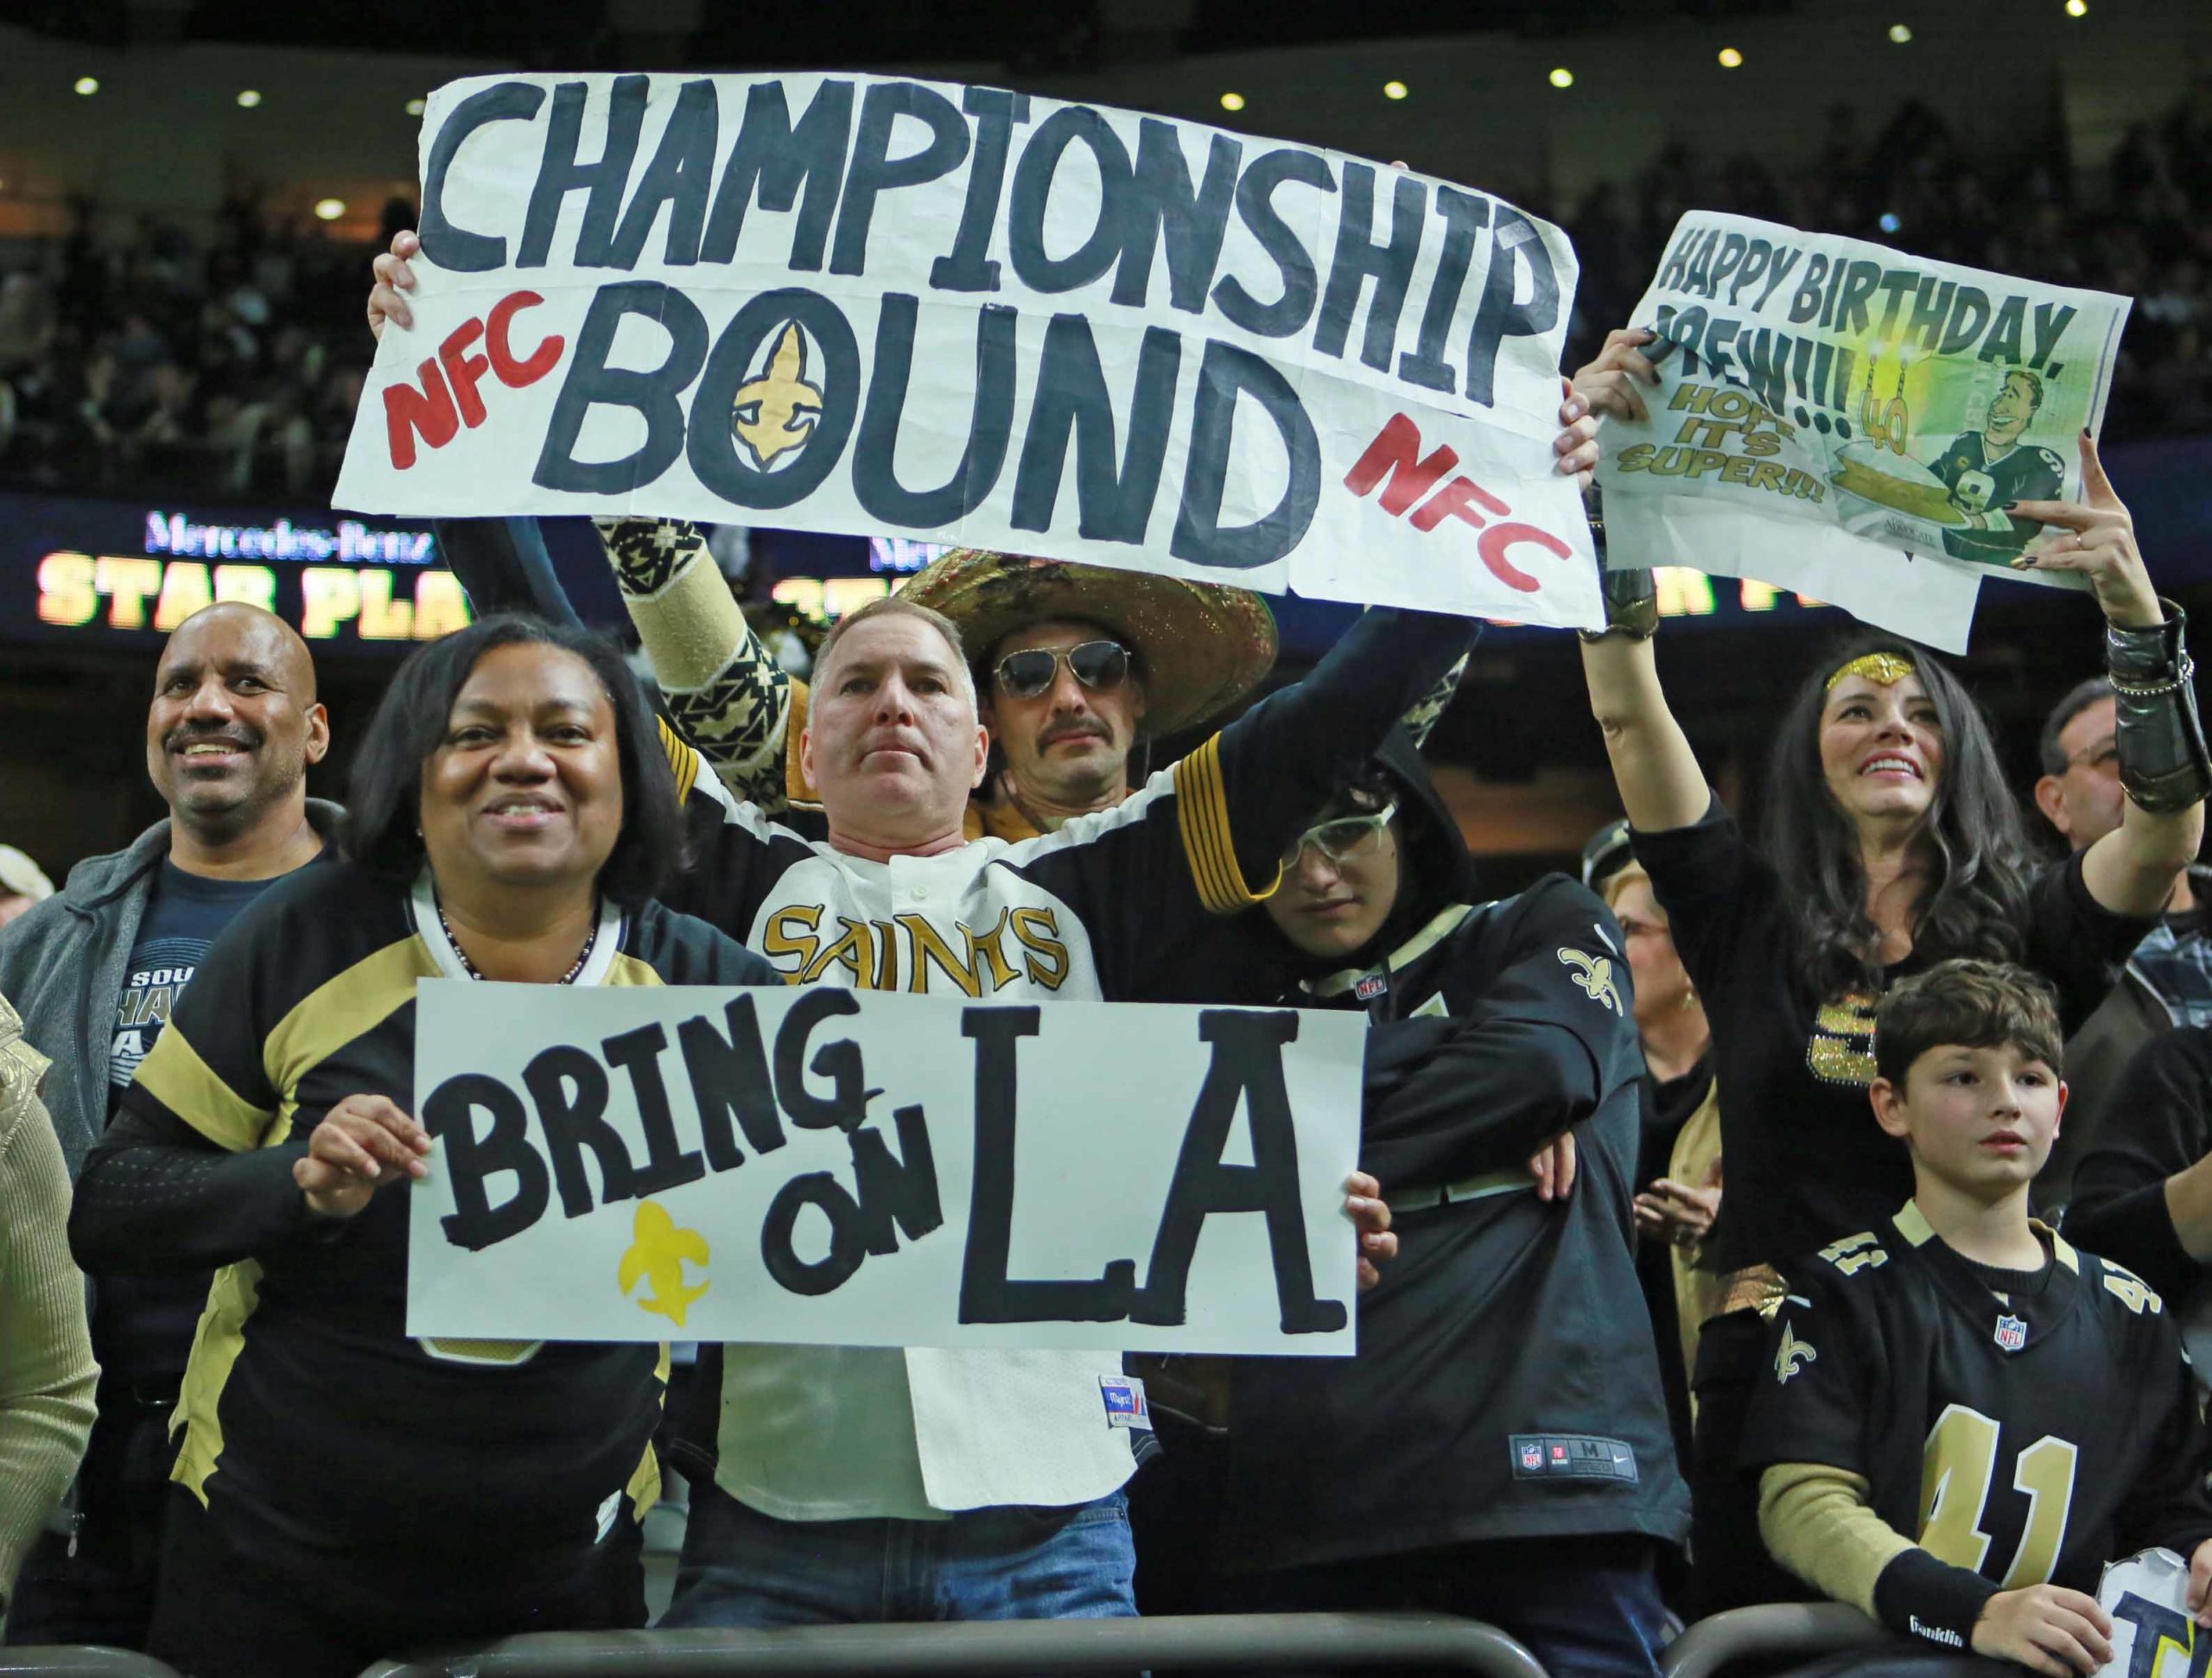 New Orleans Saints superfan Larry Rolling (top) holds up the NFC Championship bound sign at the conclusion of the NFC Divisional Playoffs at the Mercedes-Benz Superdome in New Orleans on Sunday, January 13, 2019.  (Photo by Peter G. Forest / Very Local New Orleans)